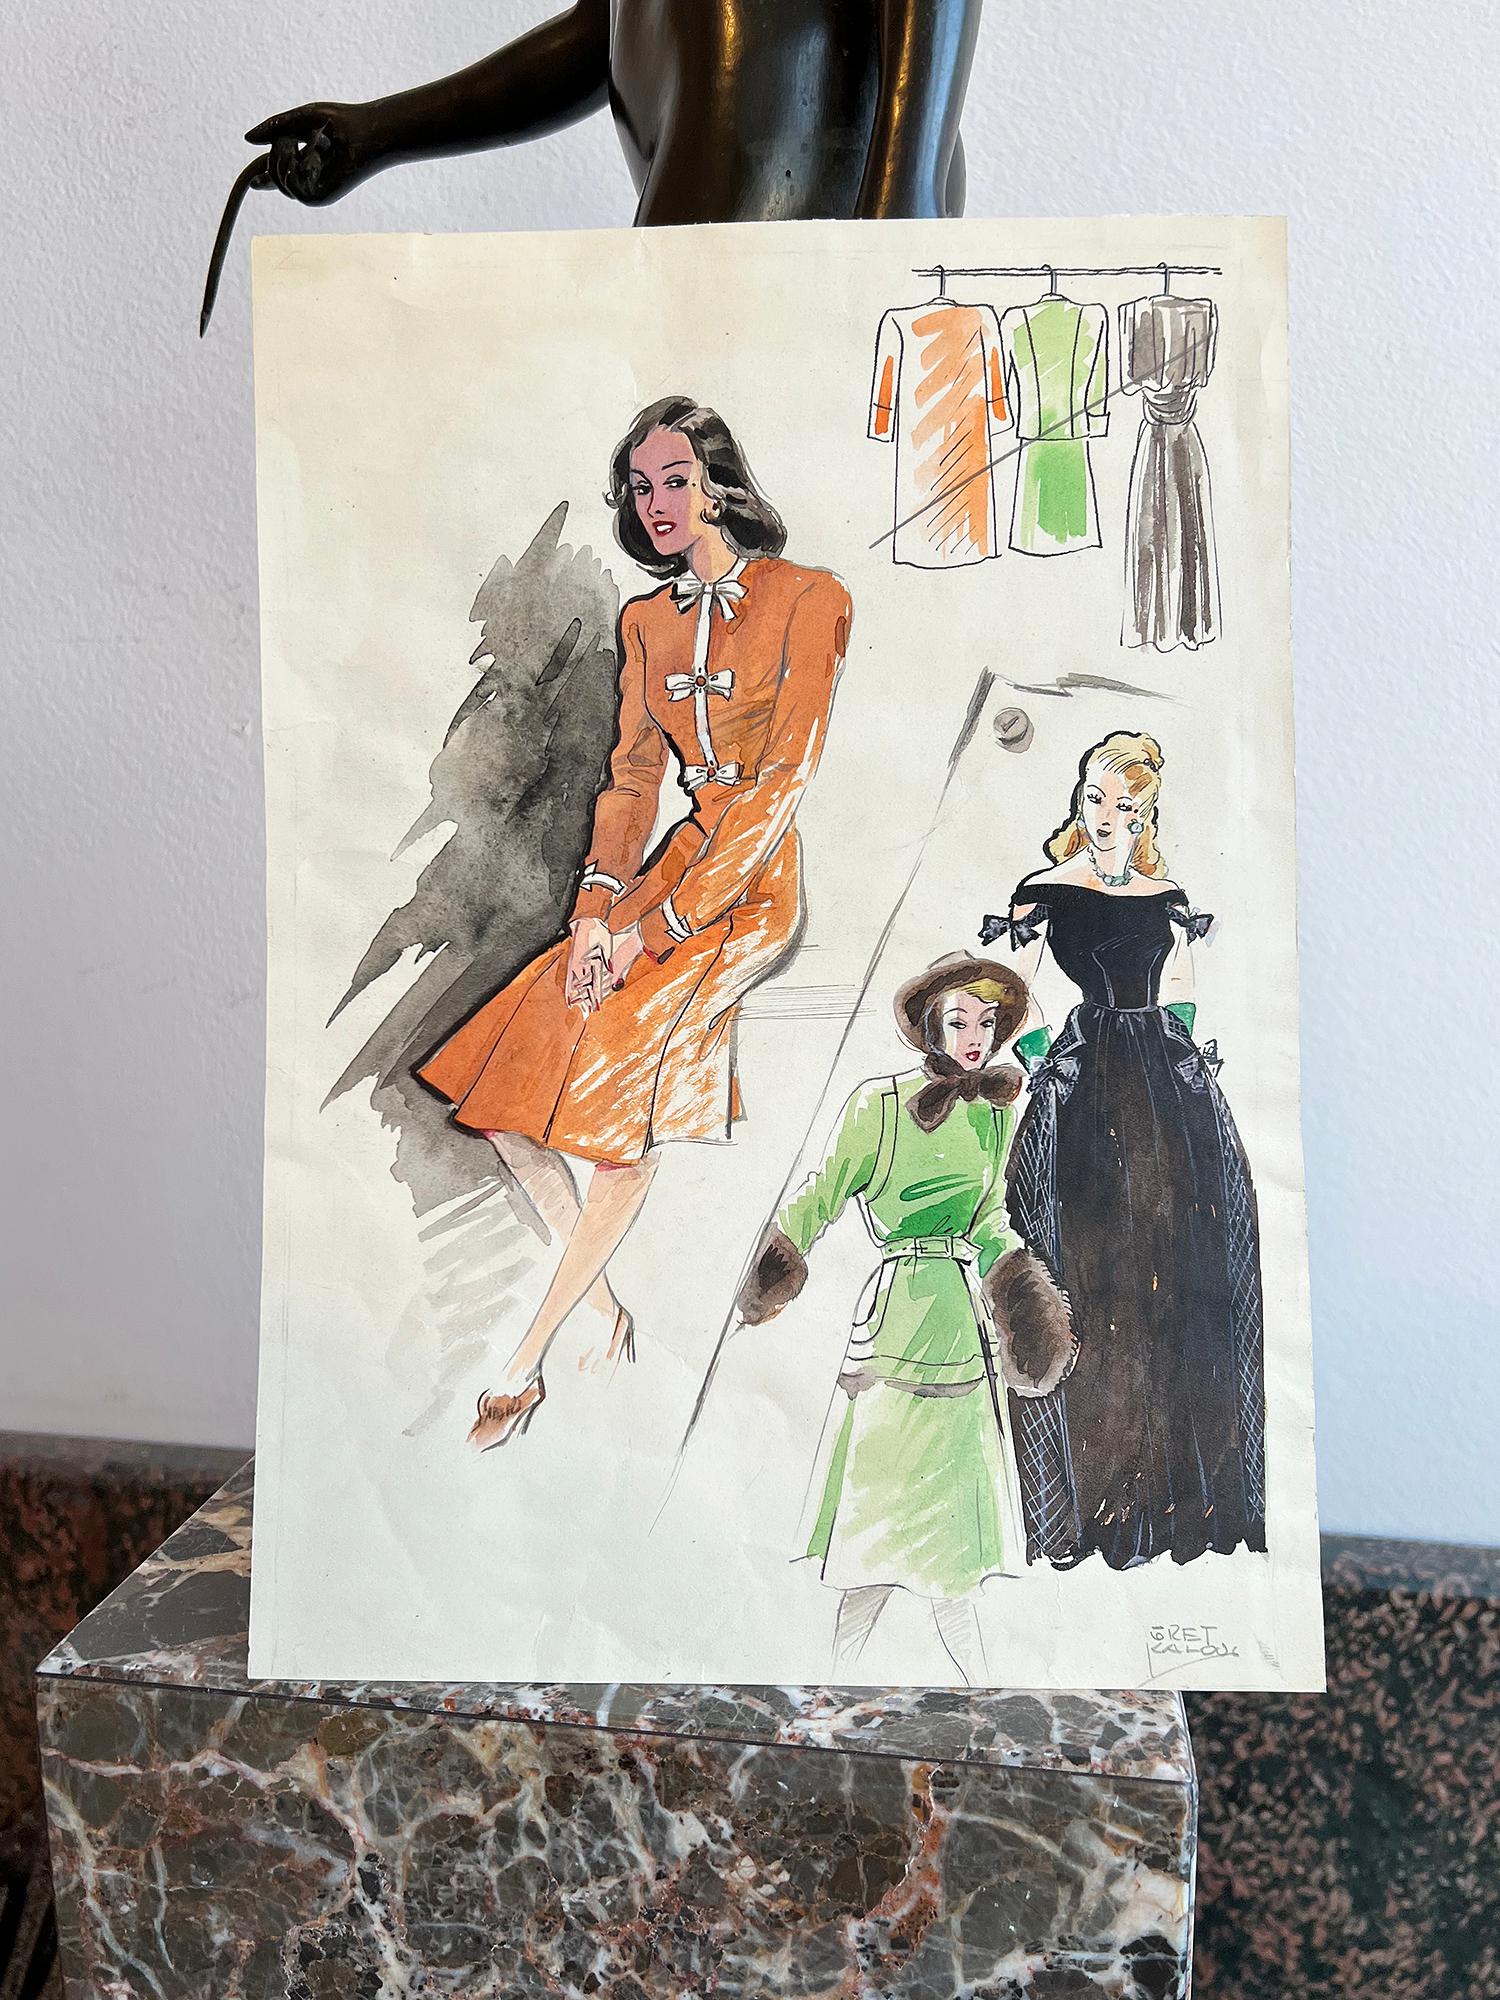 Mid-Century fashion watercolors by accomplished Austrian Female Illustrator.  Fashion Gret Kalous-Scheffer (1892 Vienna - 1975 Vienna) was a daughter of the renowned Austrian painter and owner of an art school in Vienna, Robert Scheffer. She studied